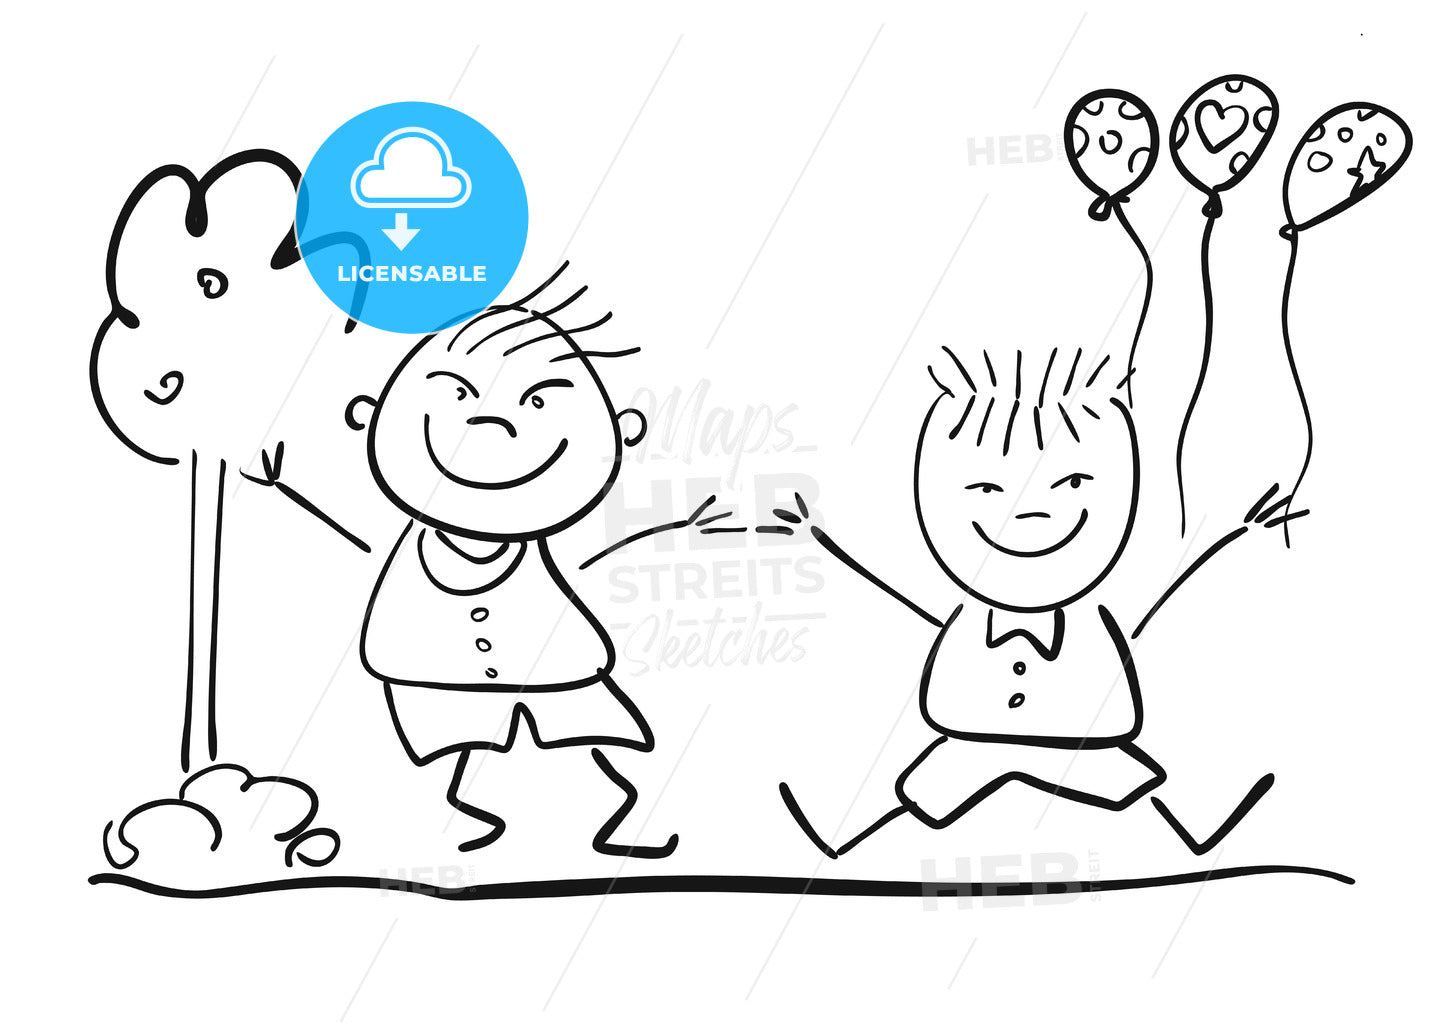 Two Happy Kids with Ballon, Friendship Symbol Sketch – instant download